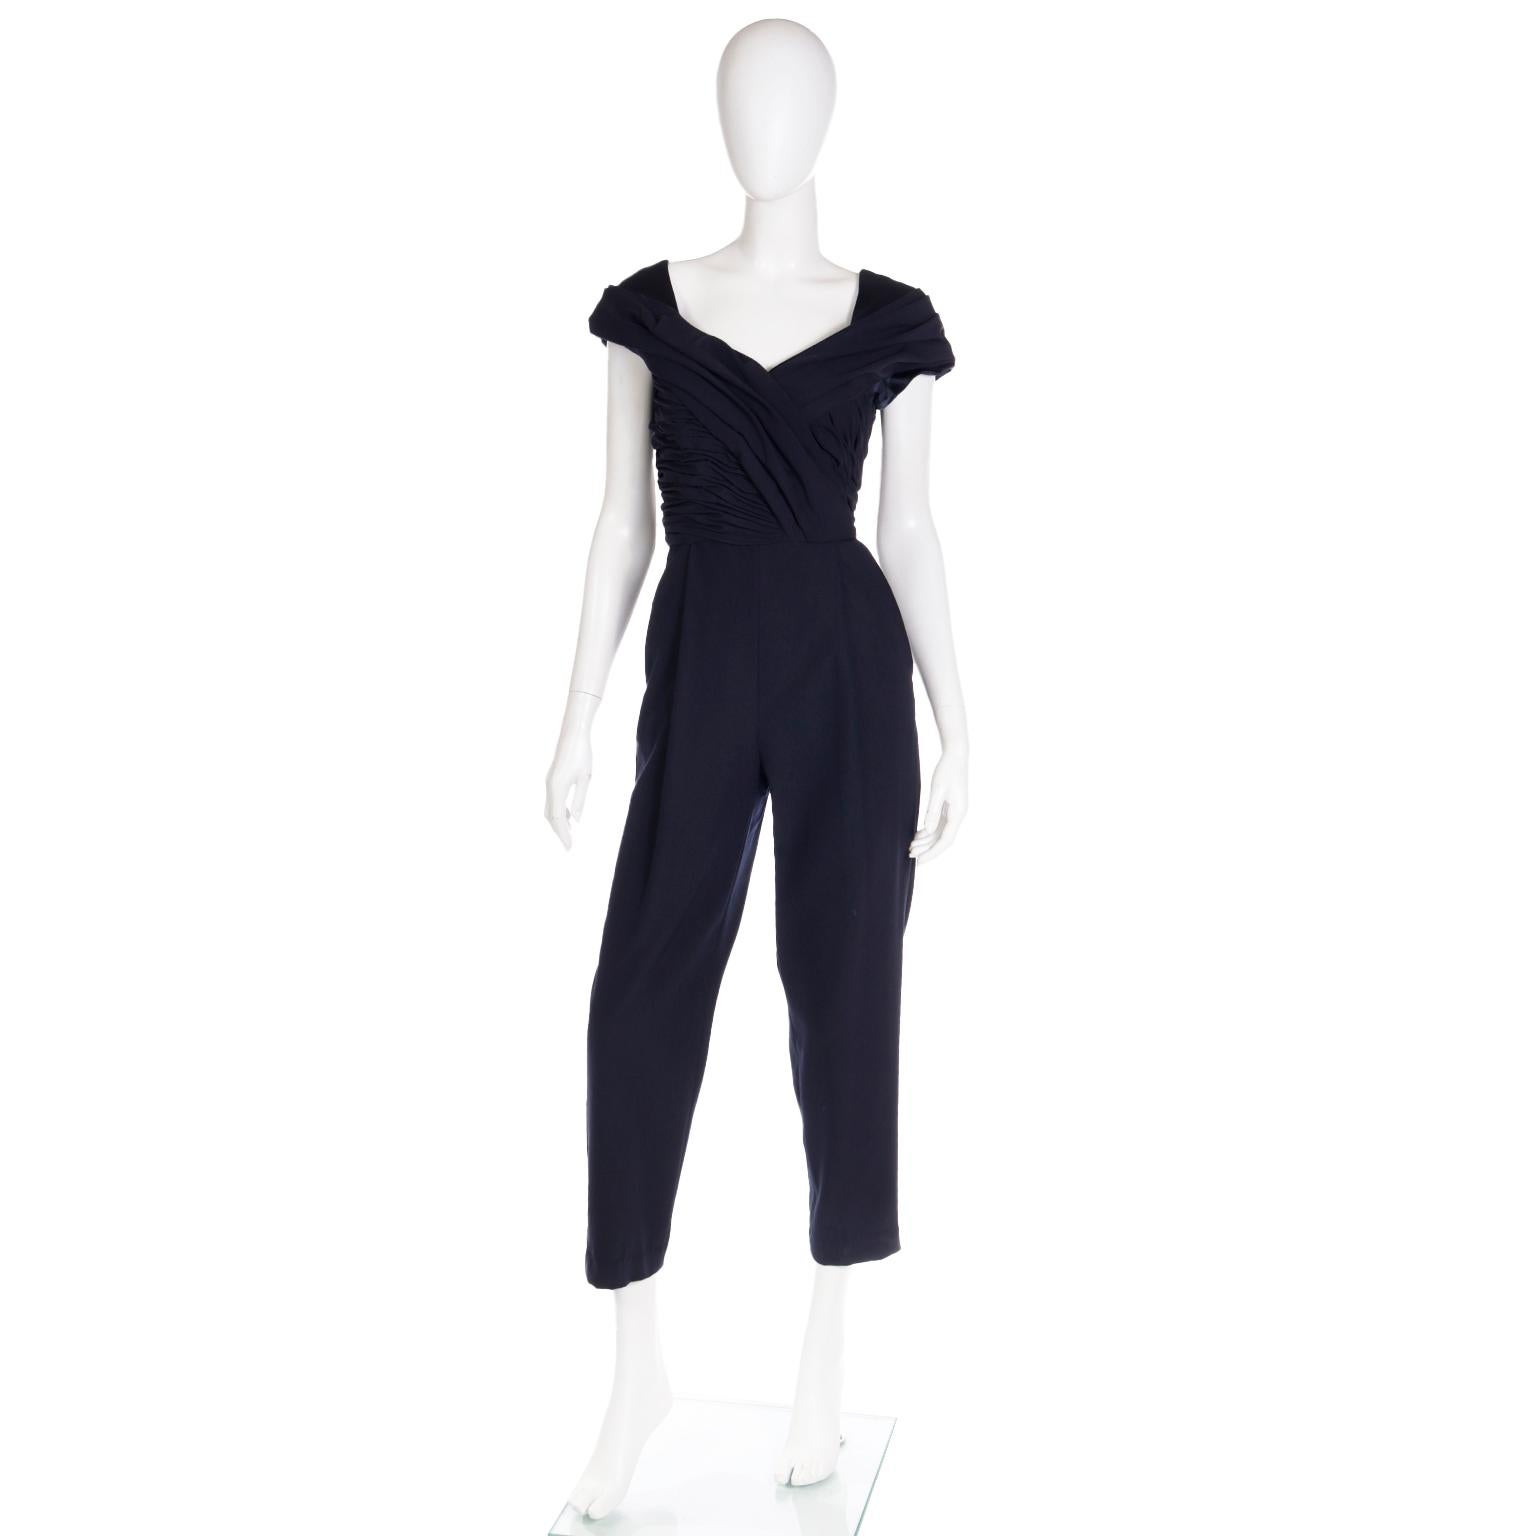 We love vintage Gianni Versace and this jumpsuit is such a fun piece to add to any wardrobe! The fabric is a wool & silk blend and the tag indicates that it is from 1990. We really love the beautiful ruching at the bodice and the wide neckline. The